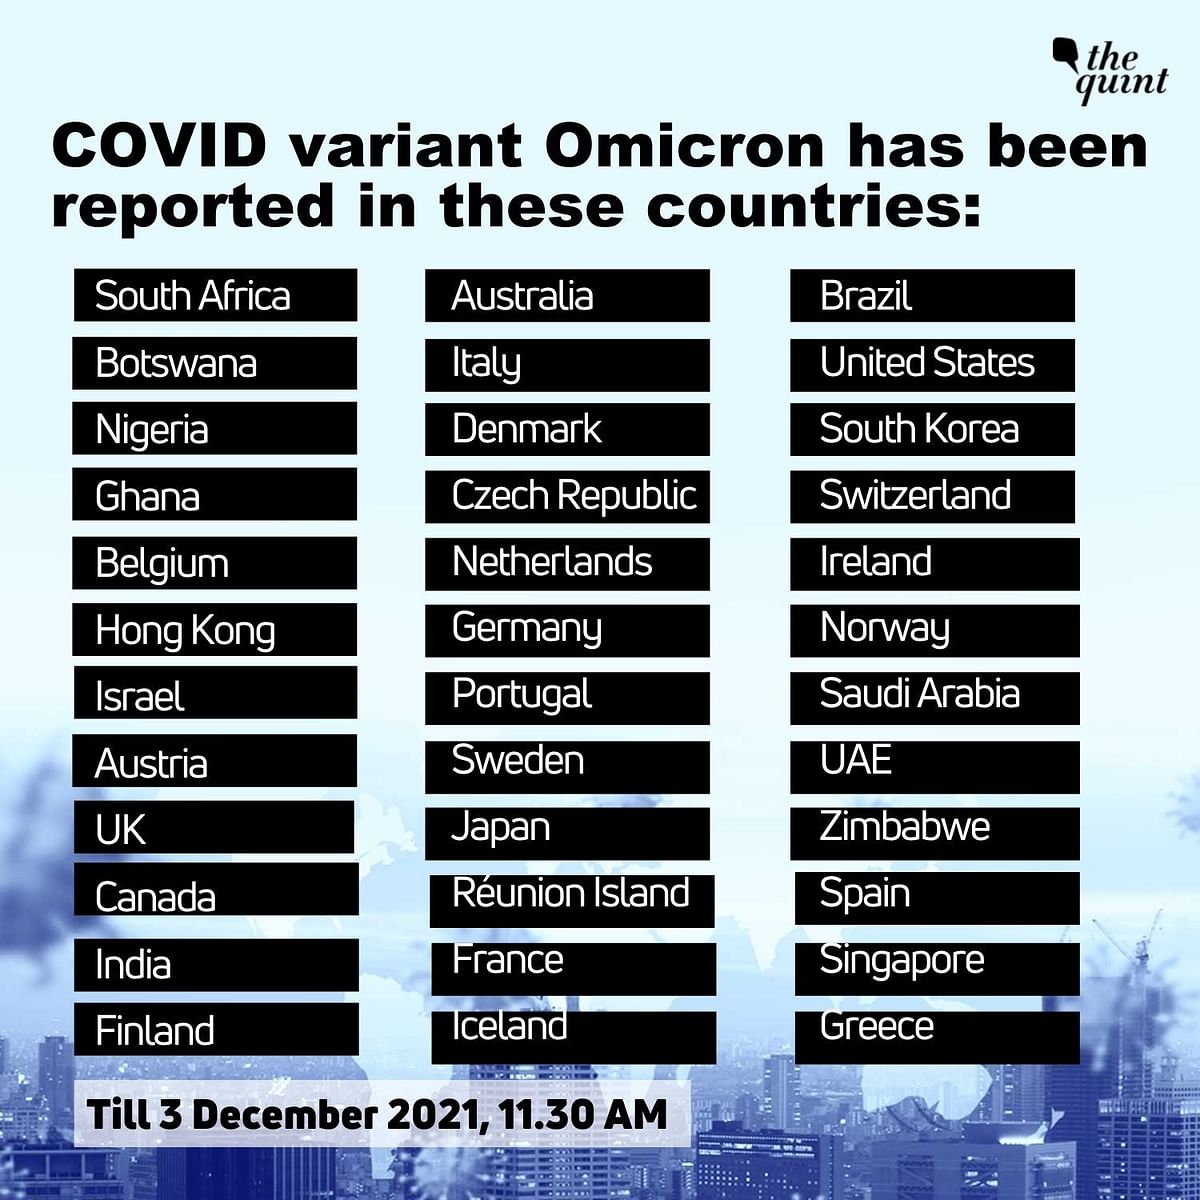 Catch all live updates on the coronavirus outbreak and the omicron variant here.